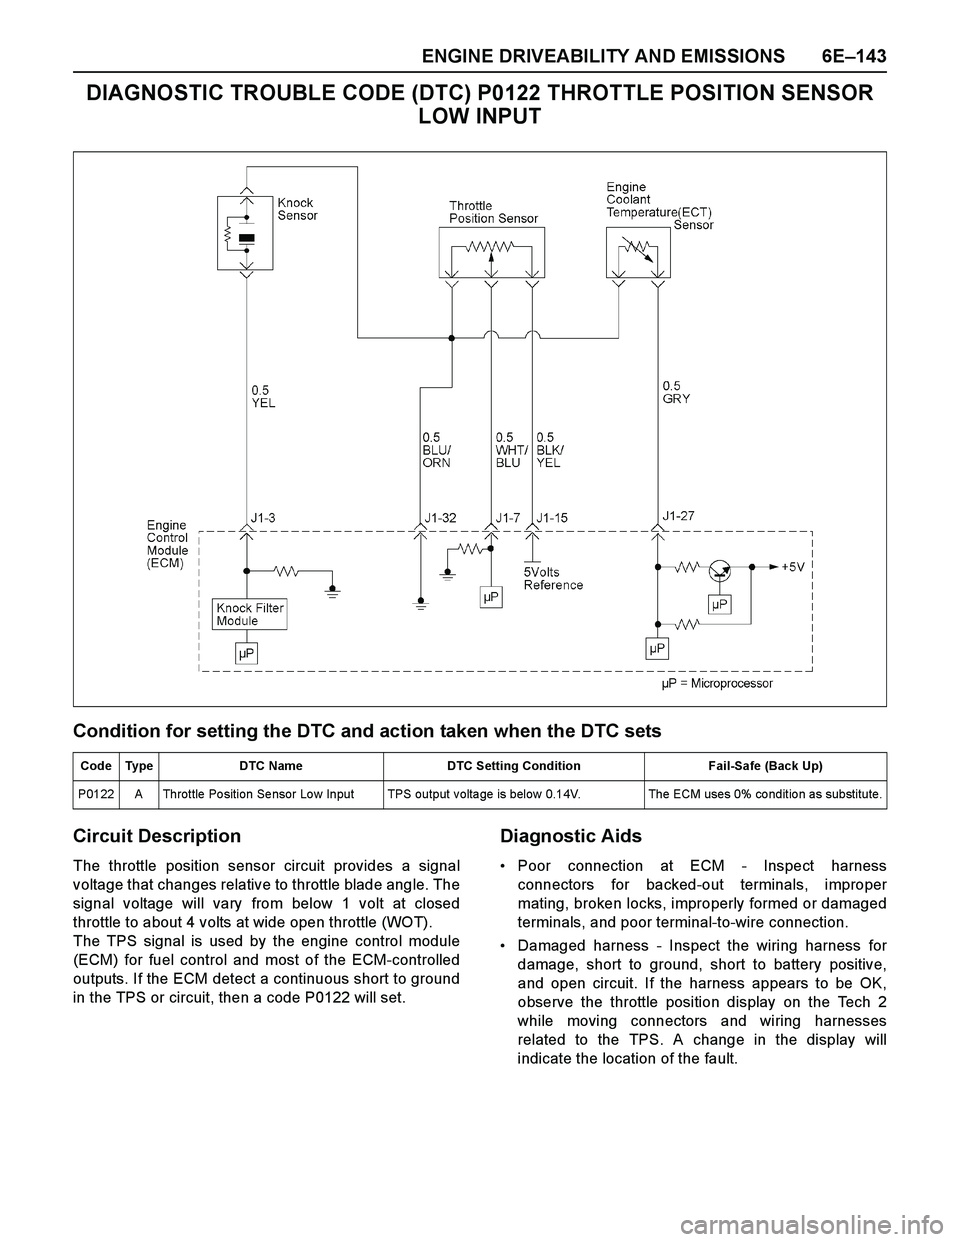 ISUZU TF SERIES 2004  Workshop Manual ENGINE DRIVEABILITY AND EMISSIONS 6E–143
DIAGNOSTIC TROUBLE CODE (DTC) P0122 THROTTLE POSITION SENSOR 
LOW INPUT
Condition for setting the DTC and action taken when the DTC sets
Circuit Description
